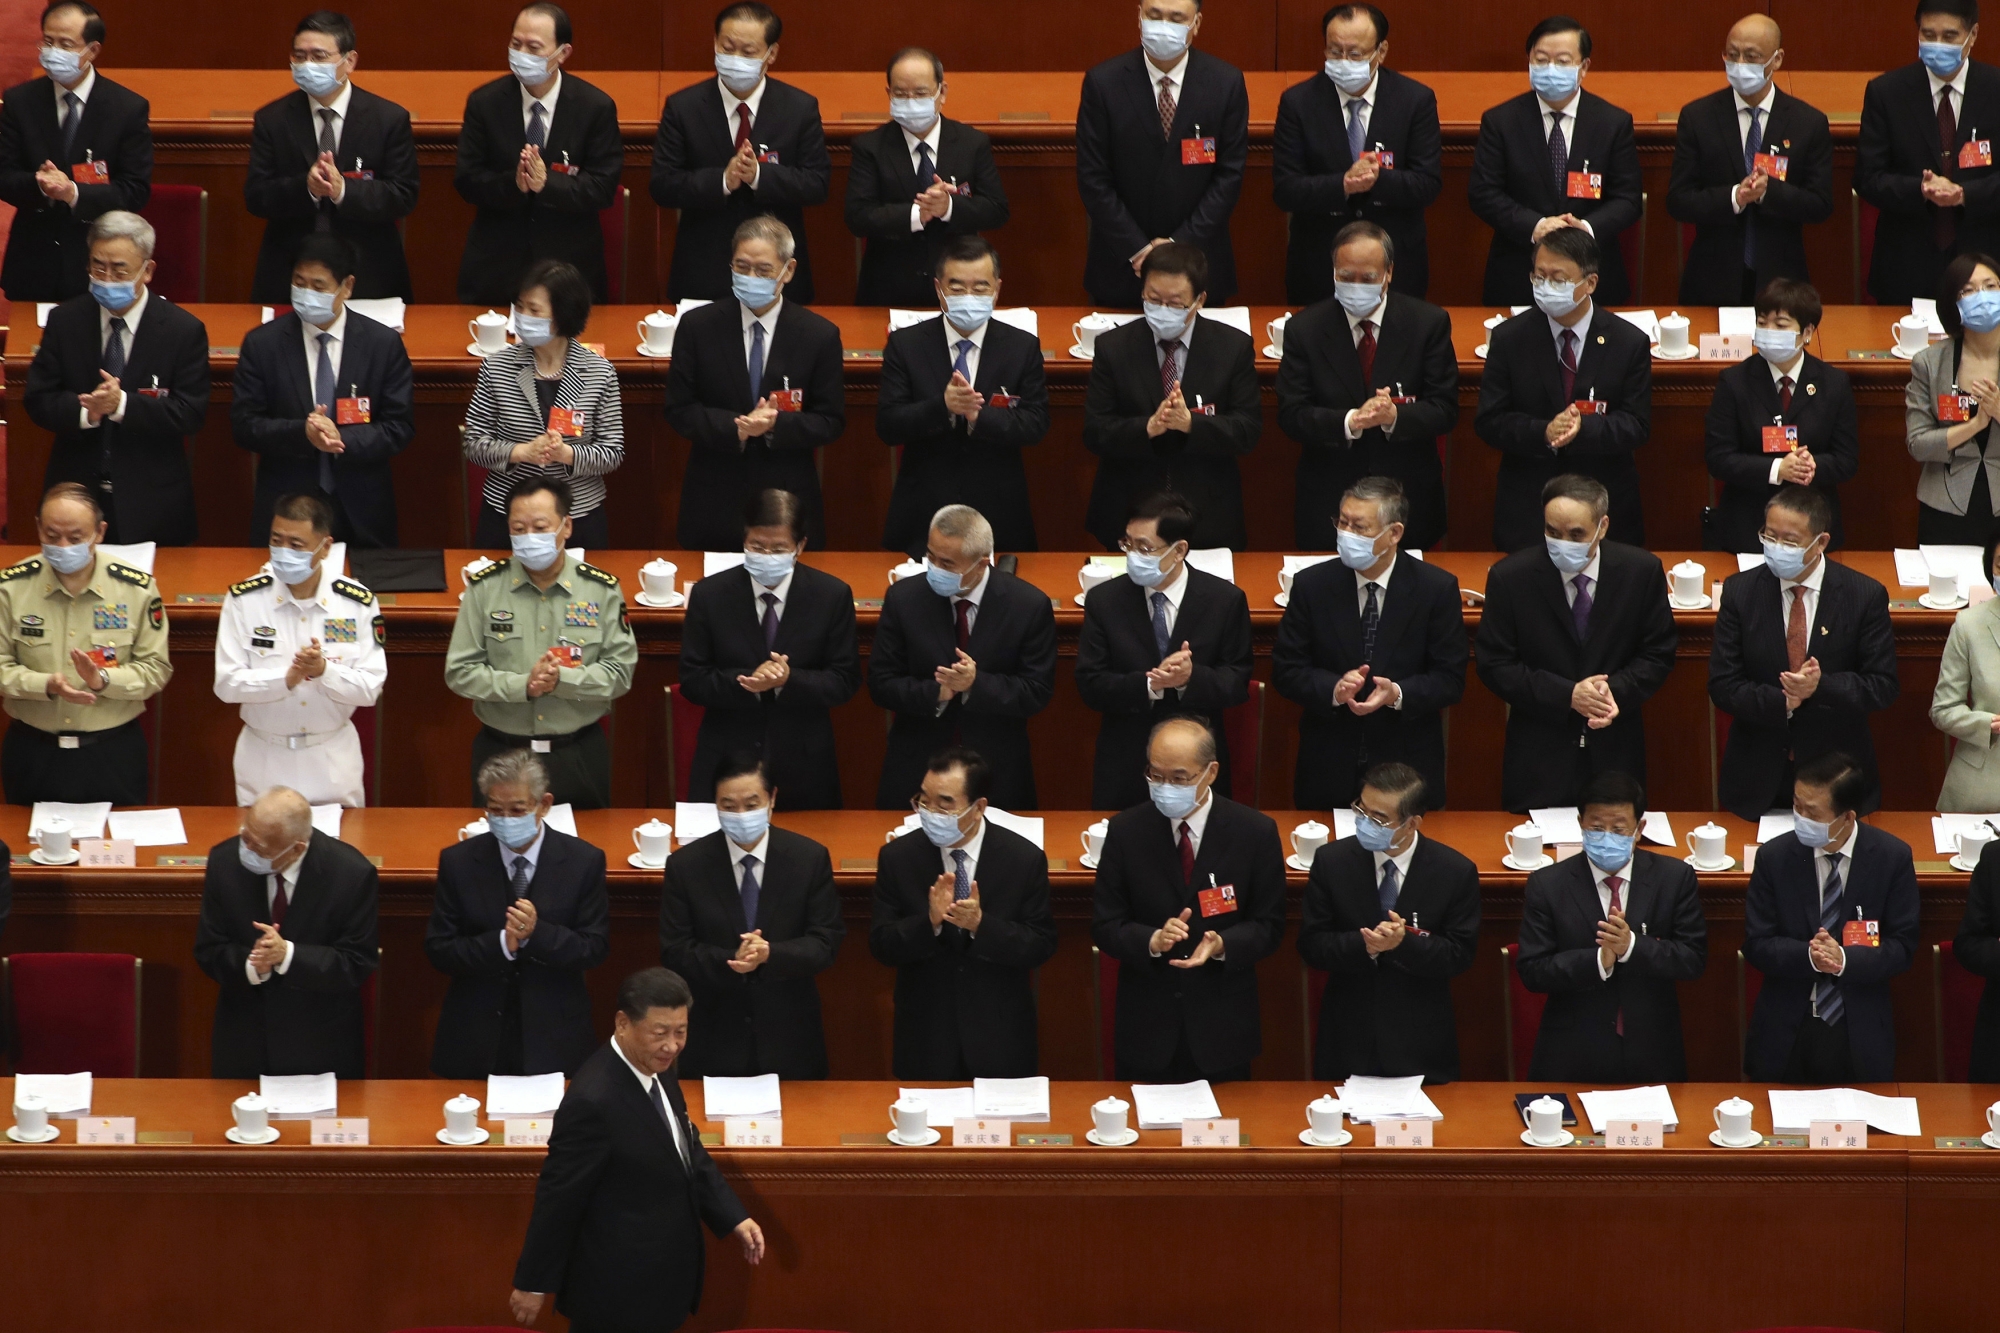 Delegates applaud as Chinese President Xi Jinping arrives for the opening session of China's National People's Congress (NPC) at the Great Hall of the People in Beijing, Friday, May 22, 2020. (AP Photo/Ng Han Guan, Pool)
Xi Jinping AP pool 12